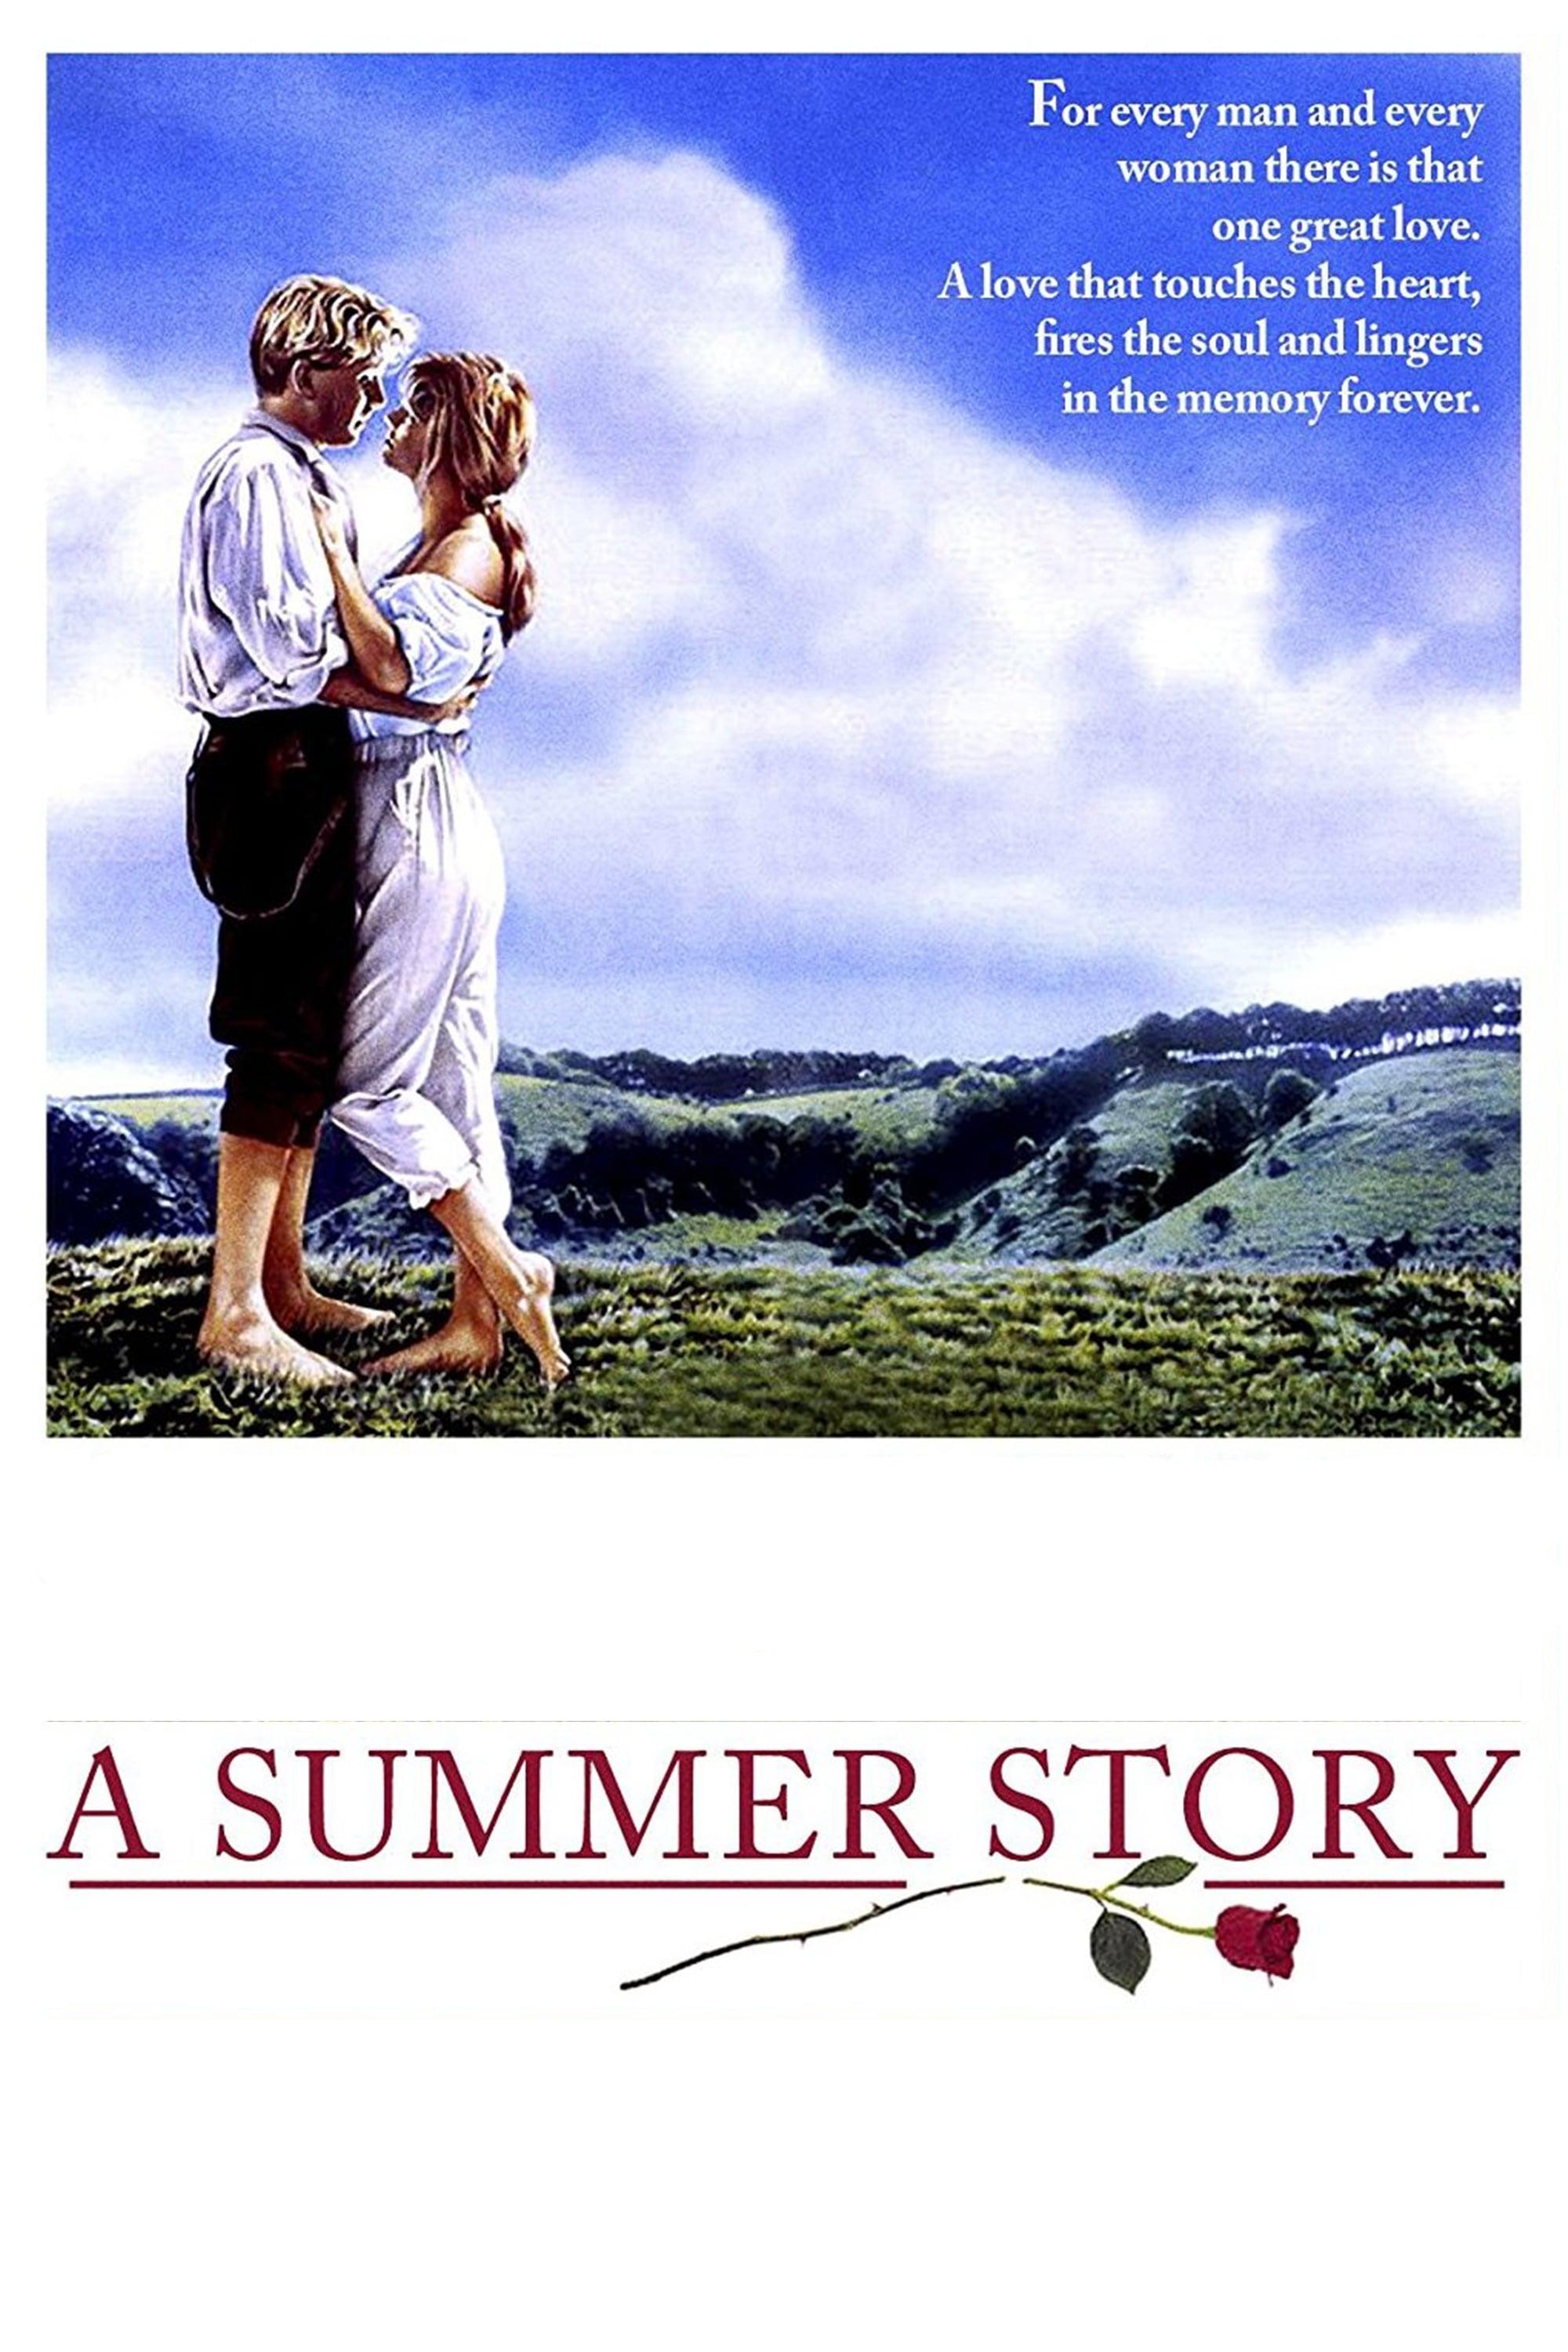 A Summer Story poster